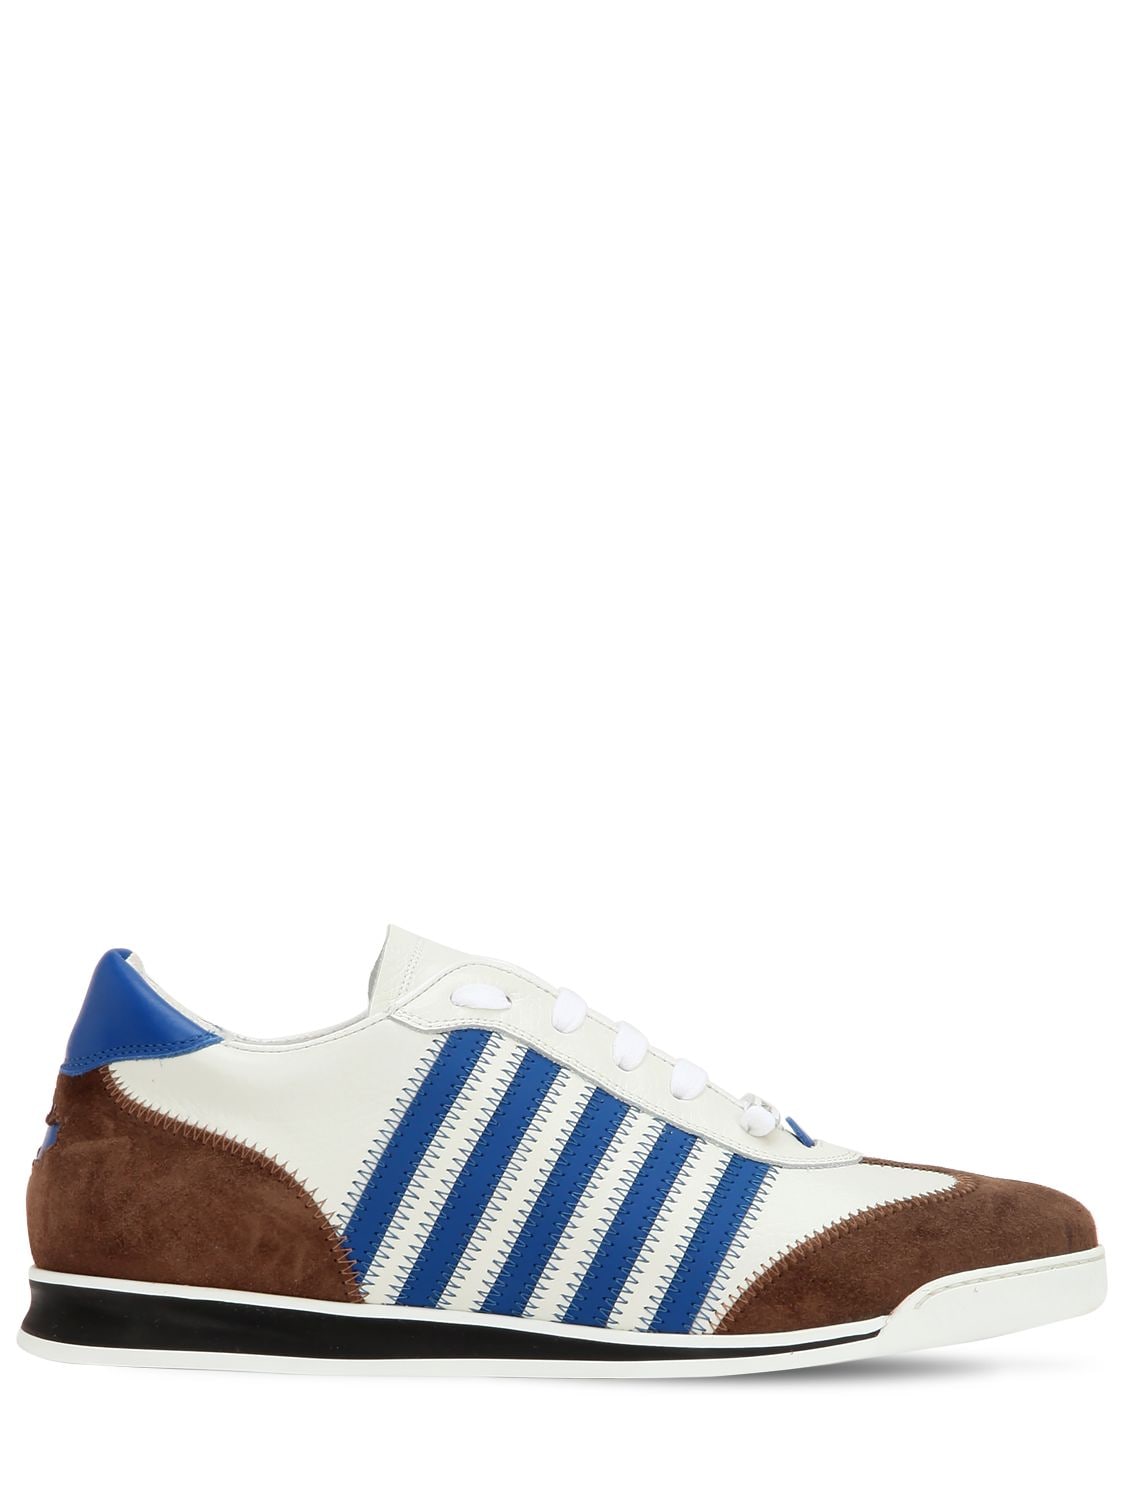 DSQUARED2 STRIPED LEATHER & SUEDE trainers,68IGH4013-TTEZNJK1